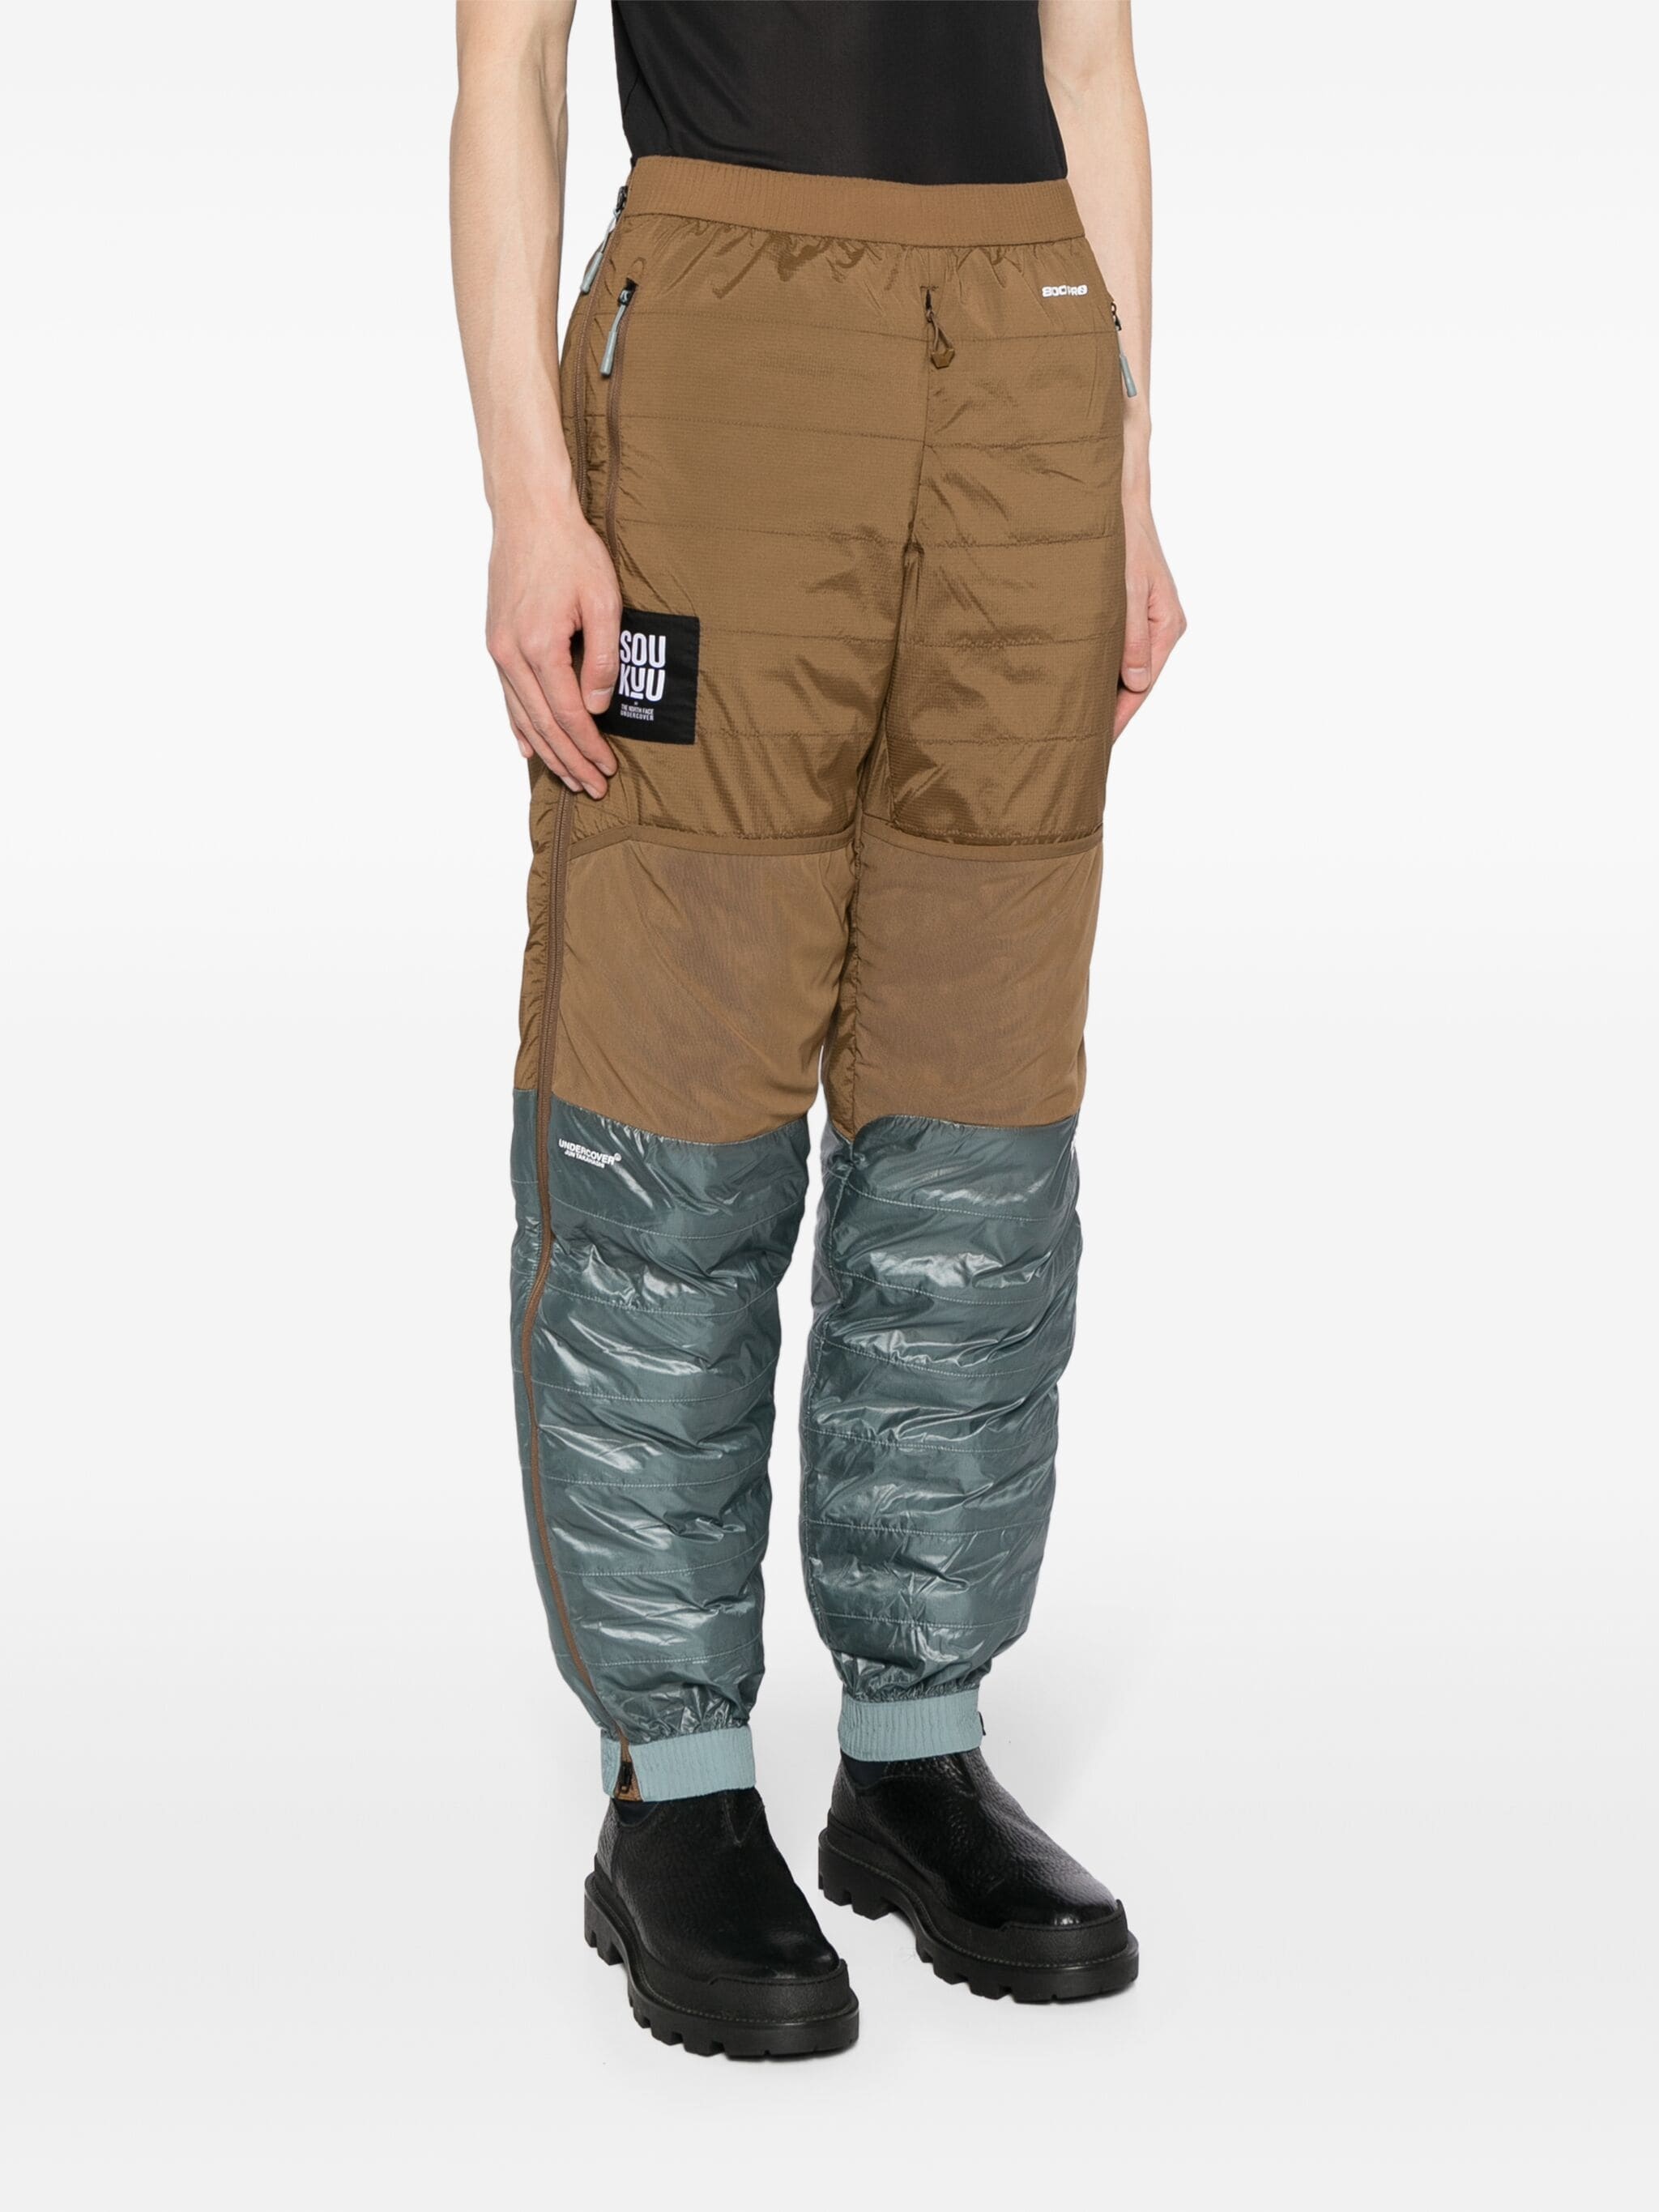 THE NORTH FACE X UNDERCOVER 50/50 Down Pants - 2